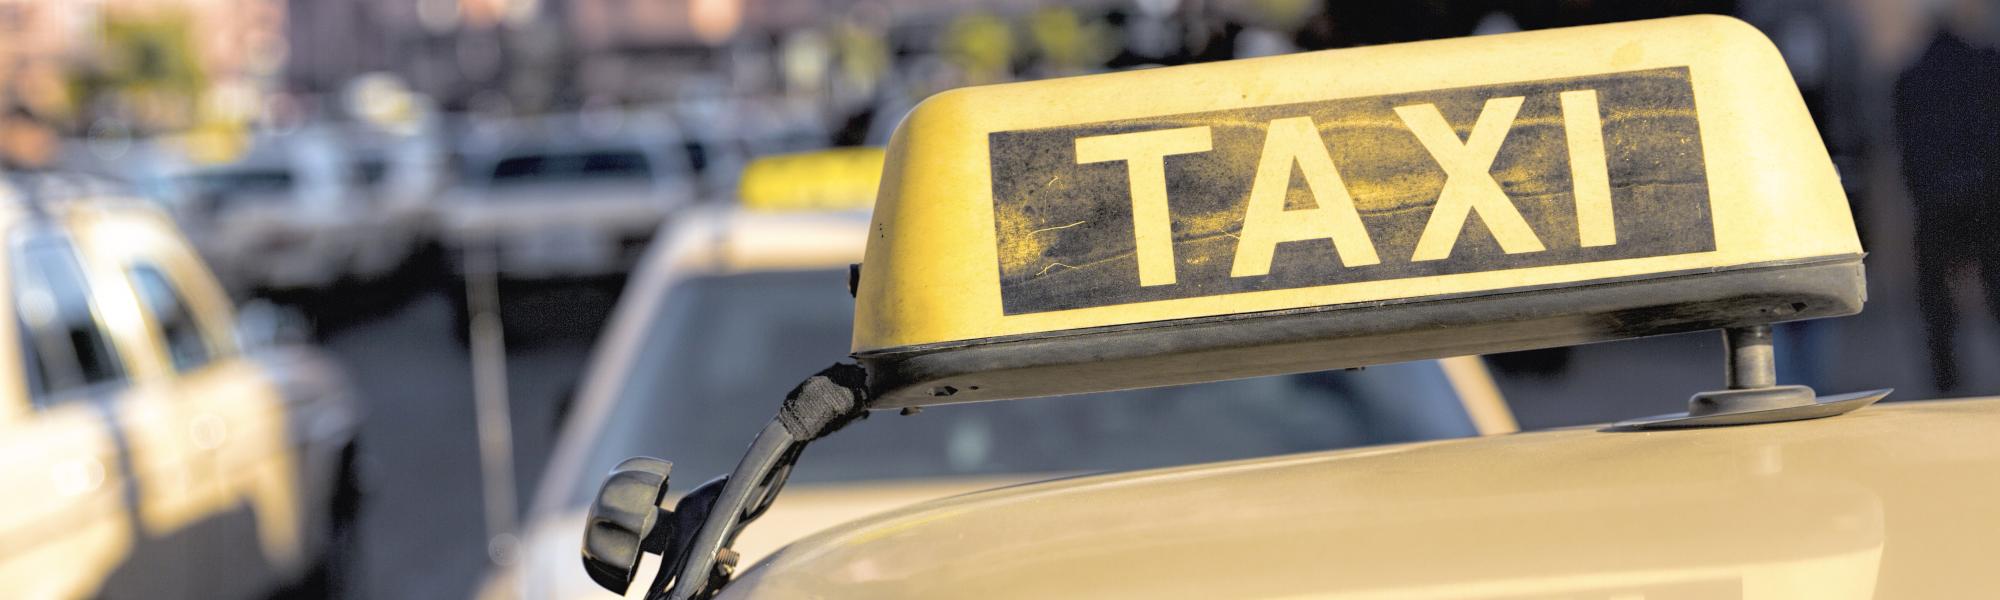 taxi_sign_on_roof_of_cab